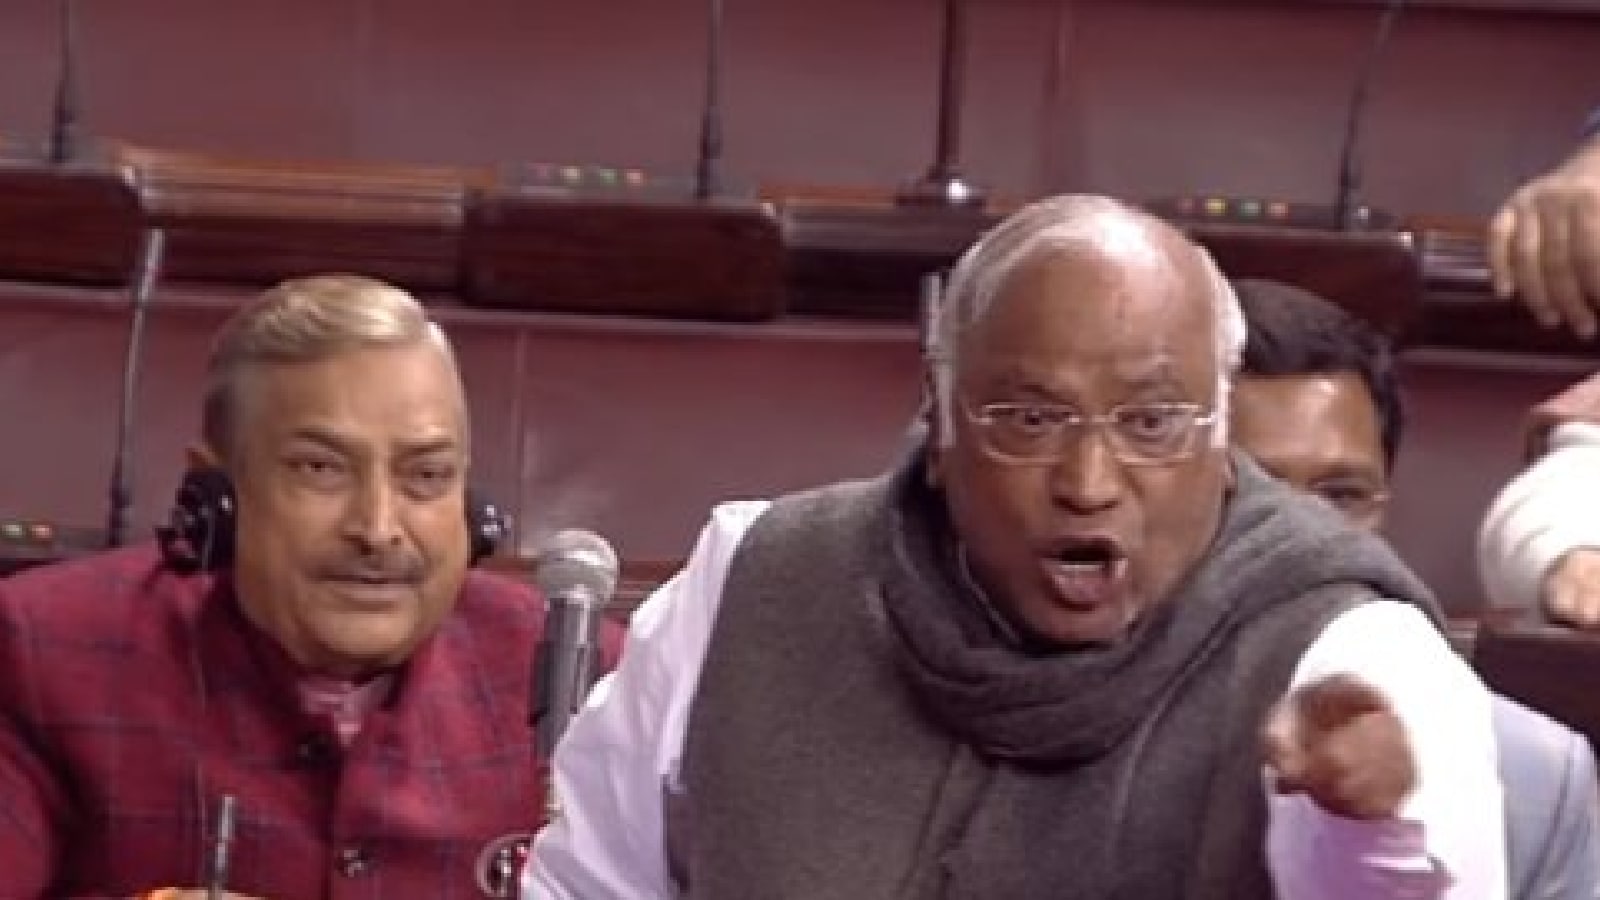 BJP’s Only Concern is Elections, Not People’s Problems: Cong Chief Kharge